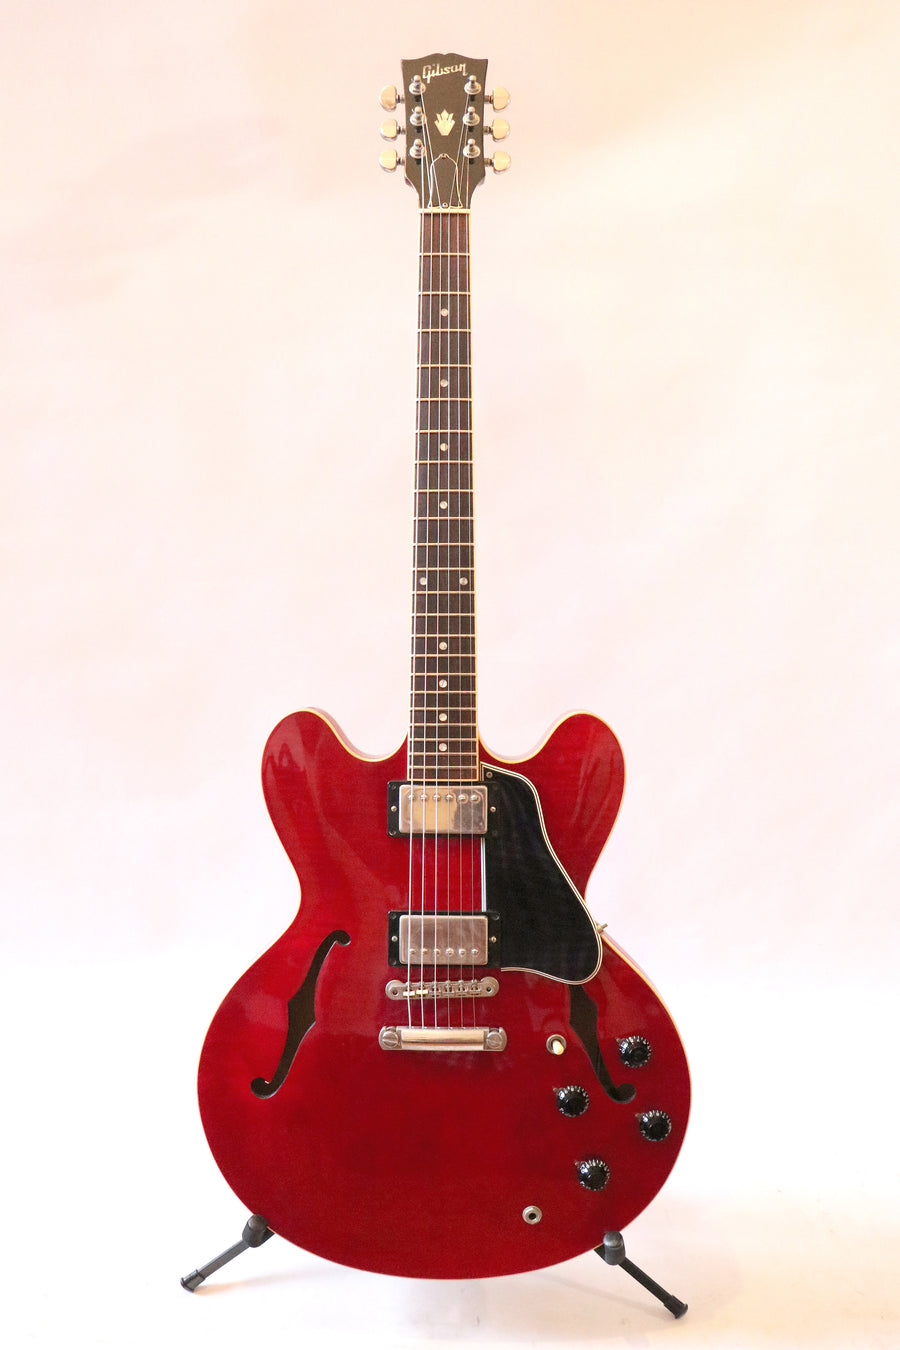 Gibson ES-335 1995 – The Guitar Colonel